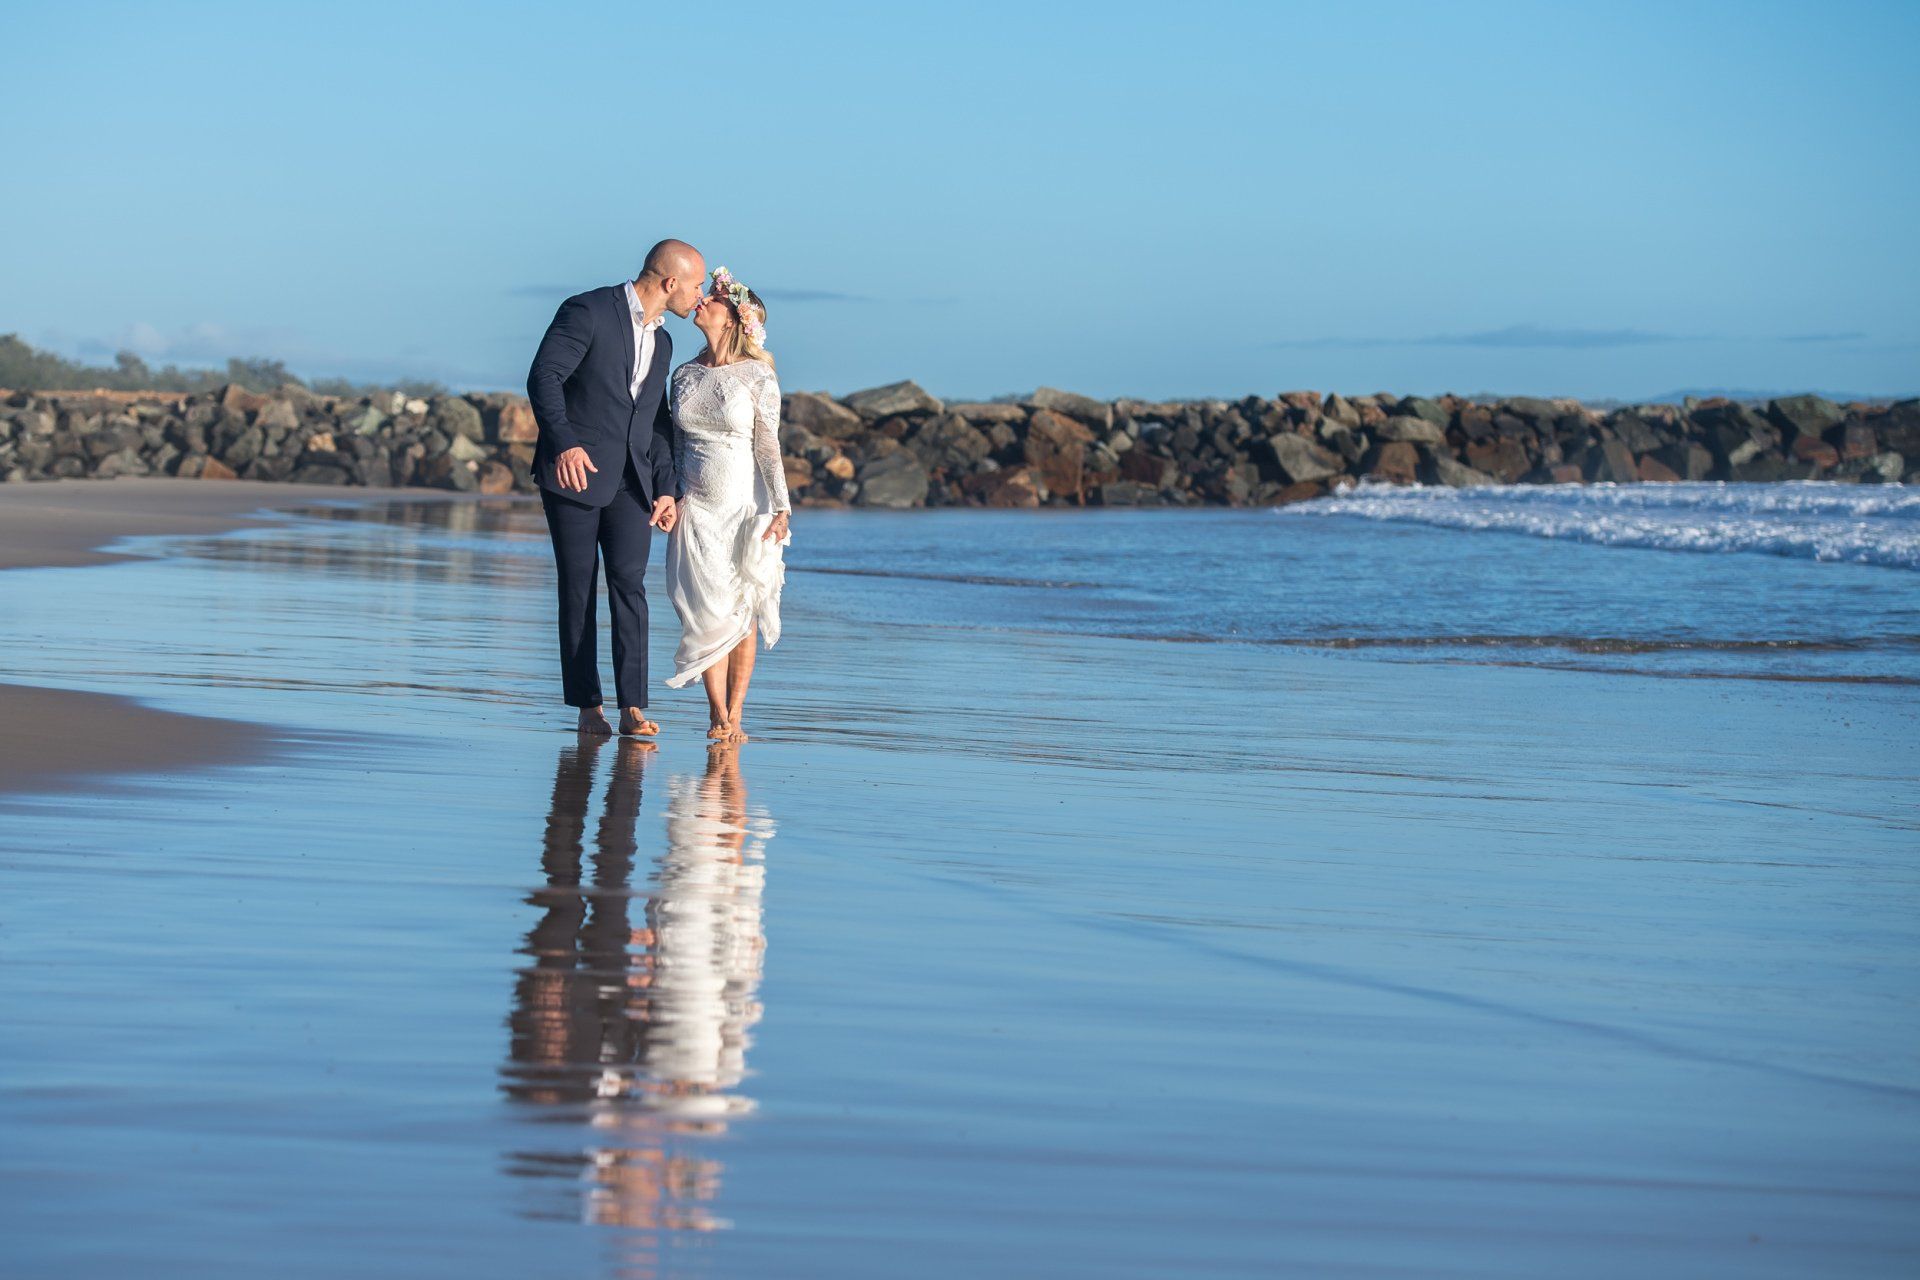 bride and groom kissing after their sunrise elopement in Noosa, walking in the ocean with their reflection visible by Noosa rockwall